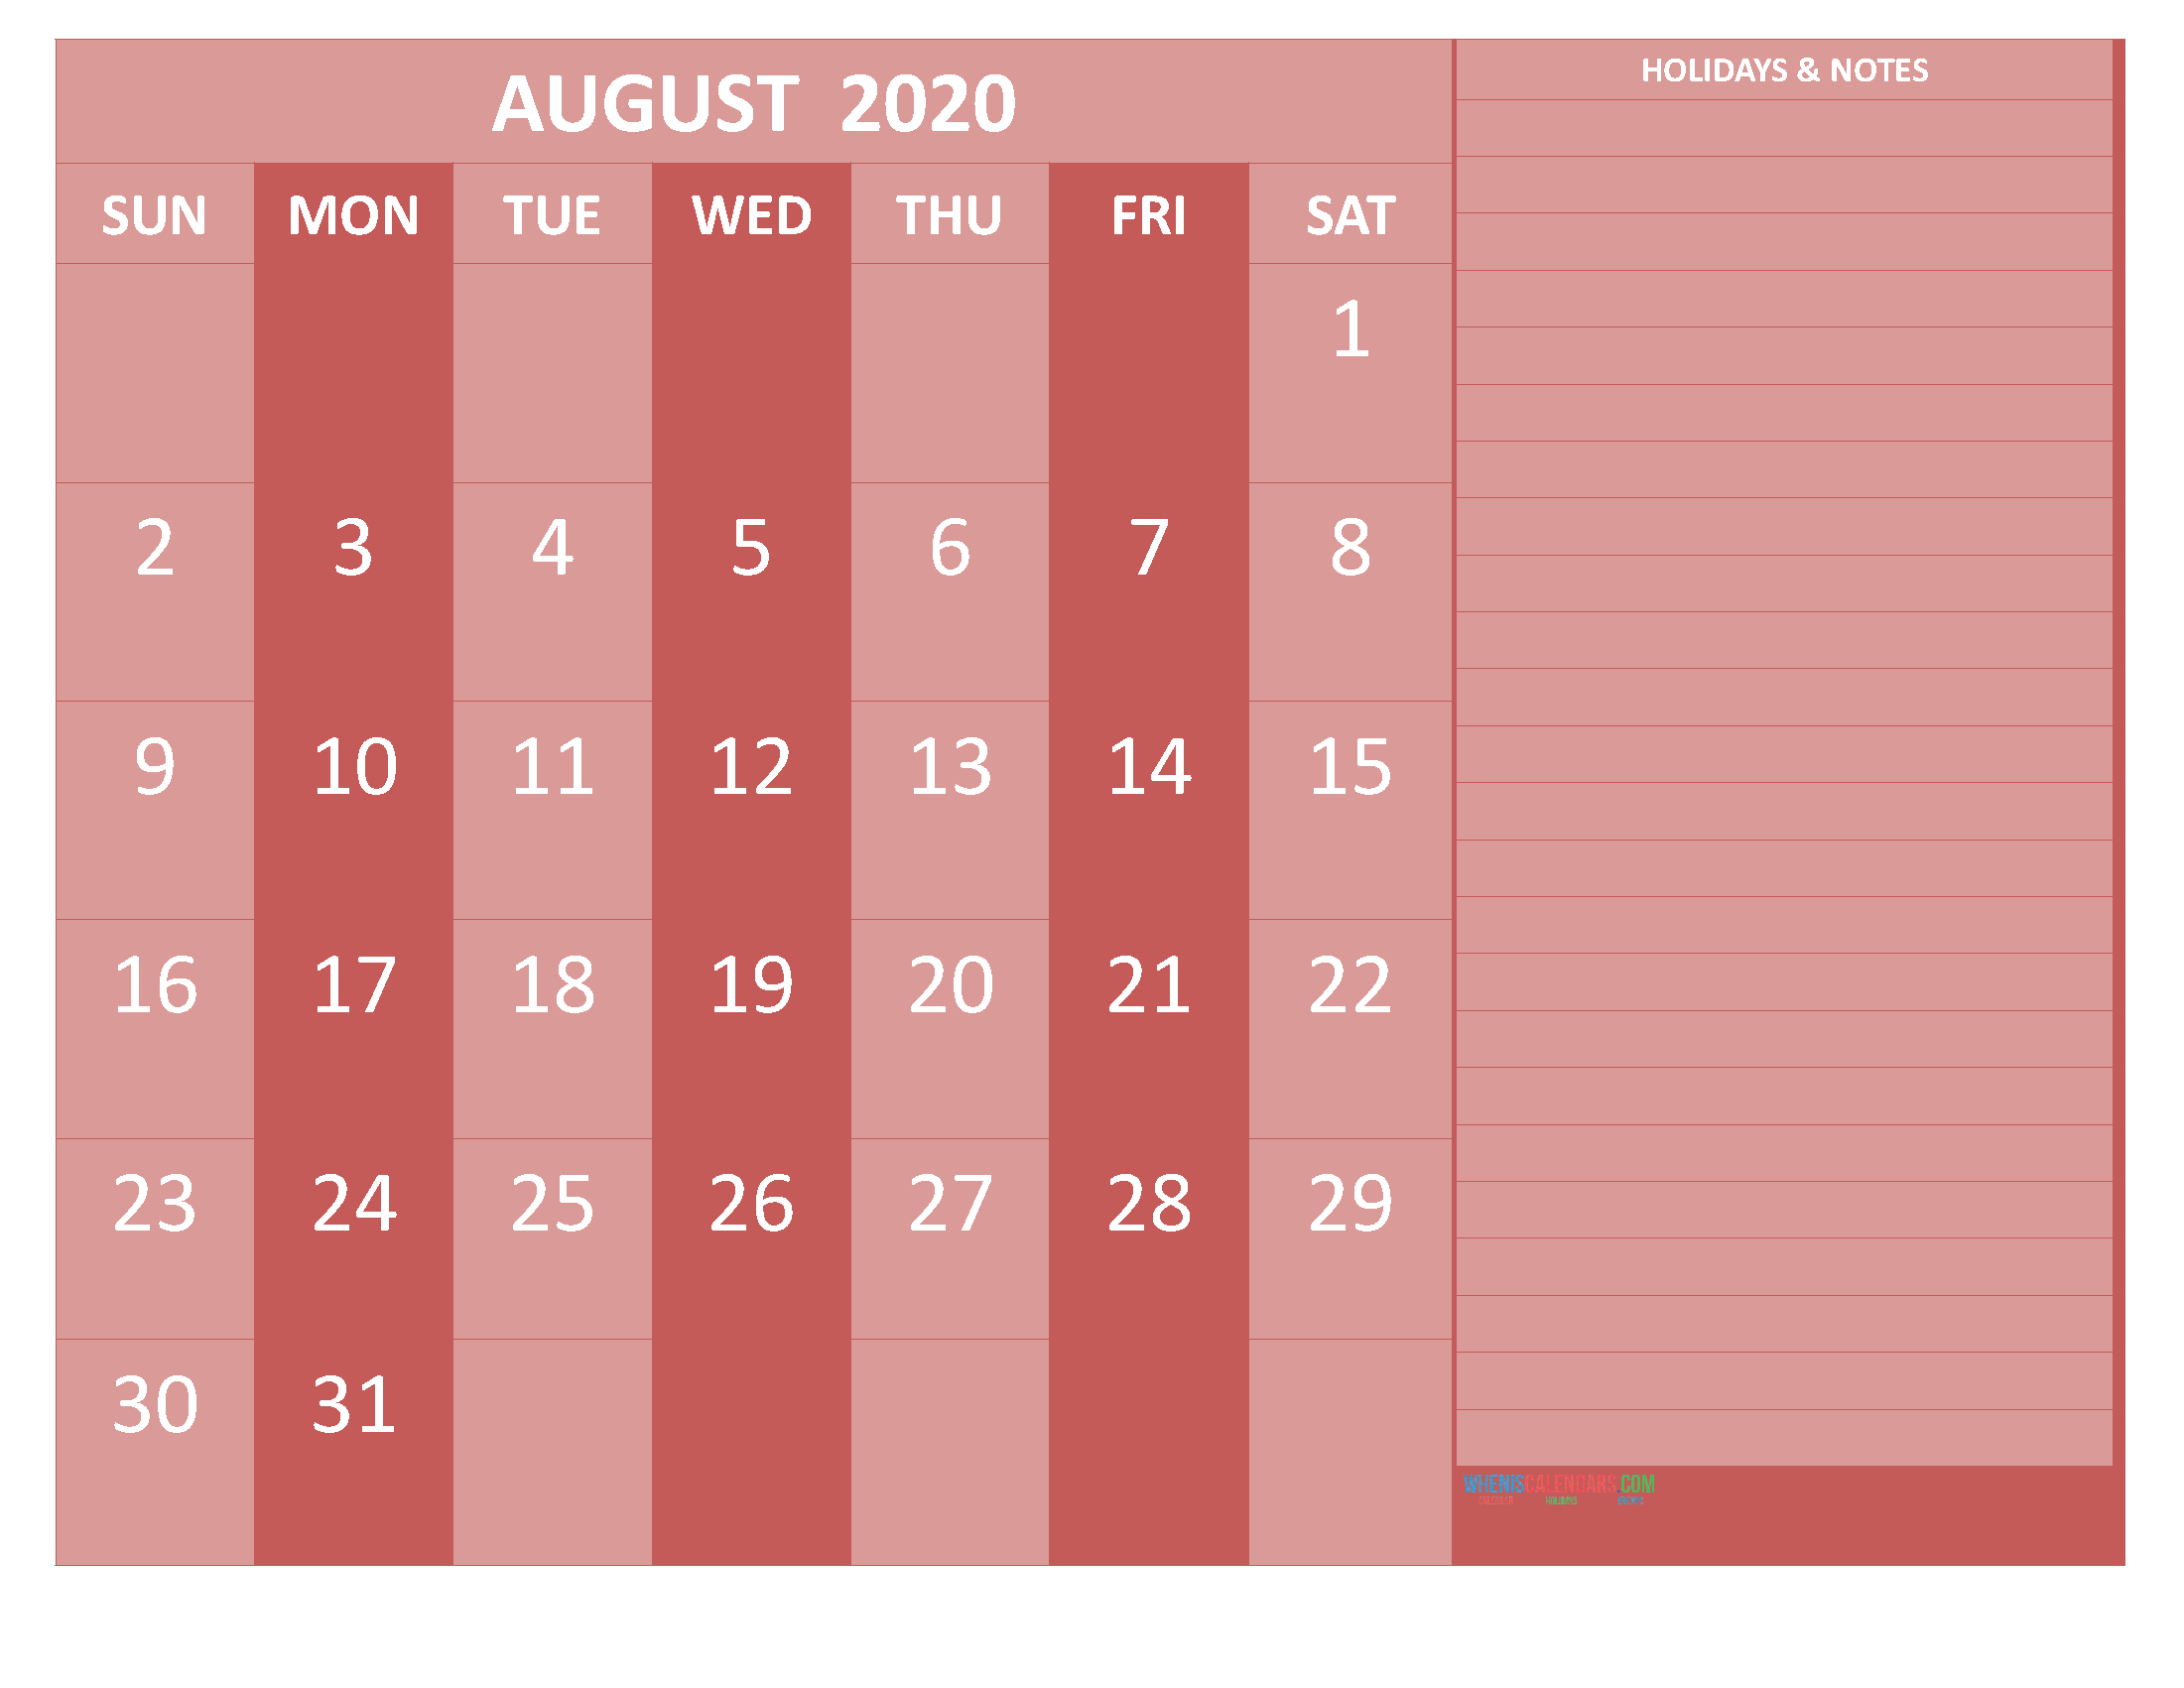 Free Printable August 2020 Calendar with Holidays